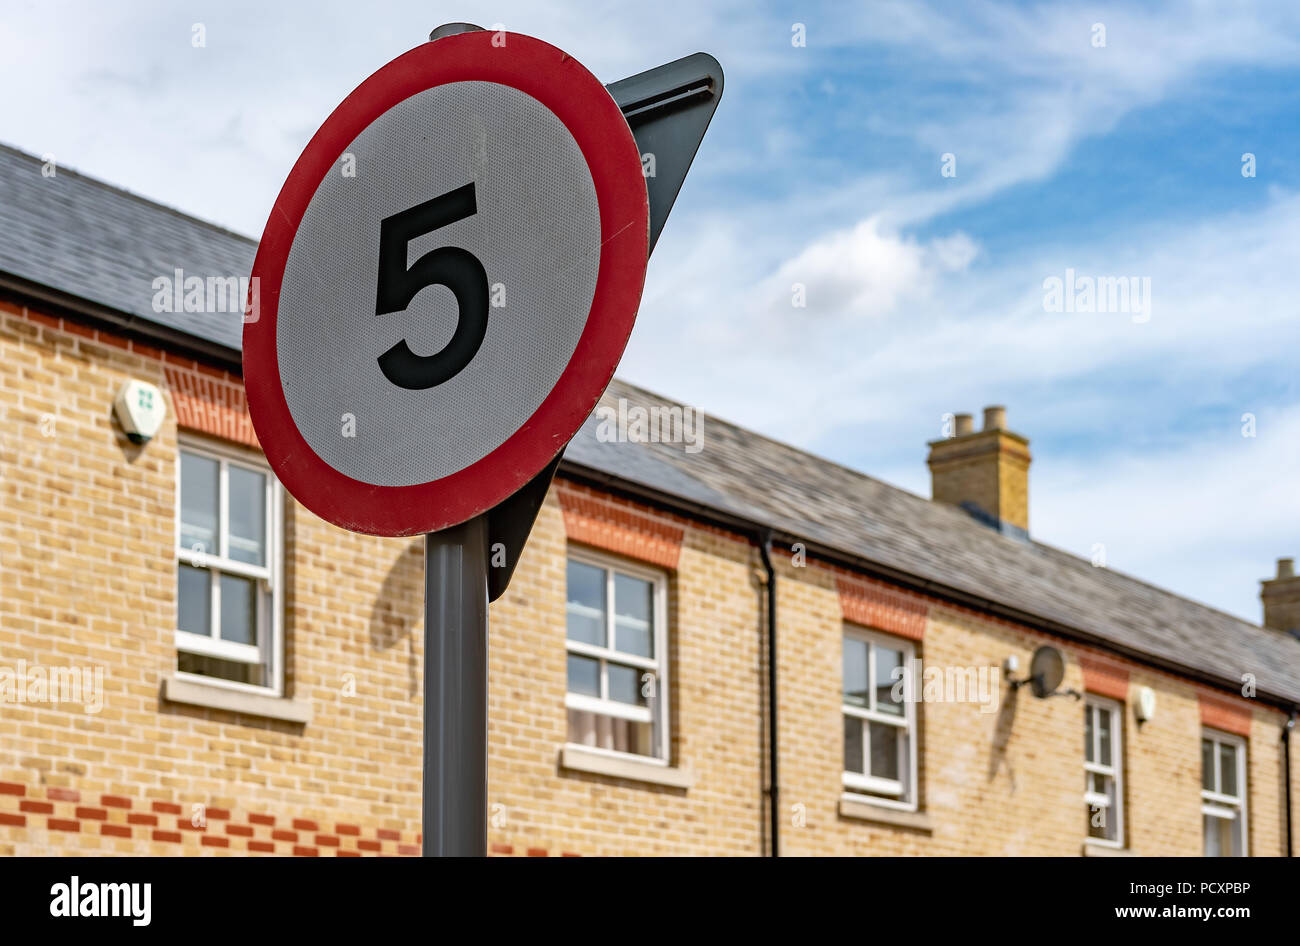 Isolated image of a 5mph speed limit sign seen within a town centre. The background shows new terraced houses located in a quiet street in the UK. Stock Photo